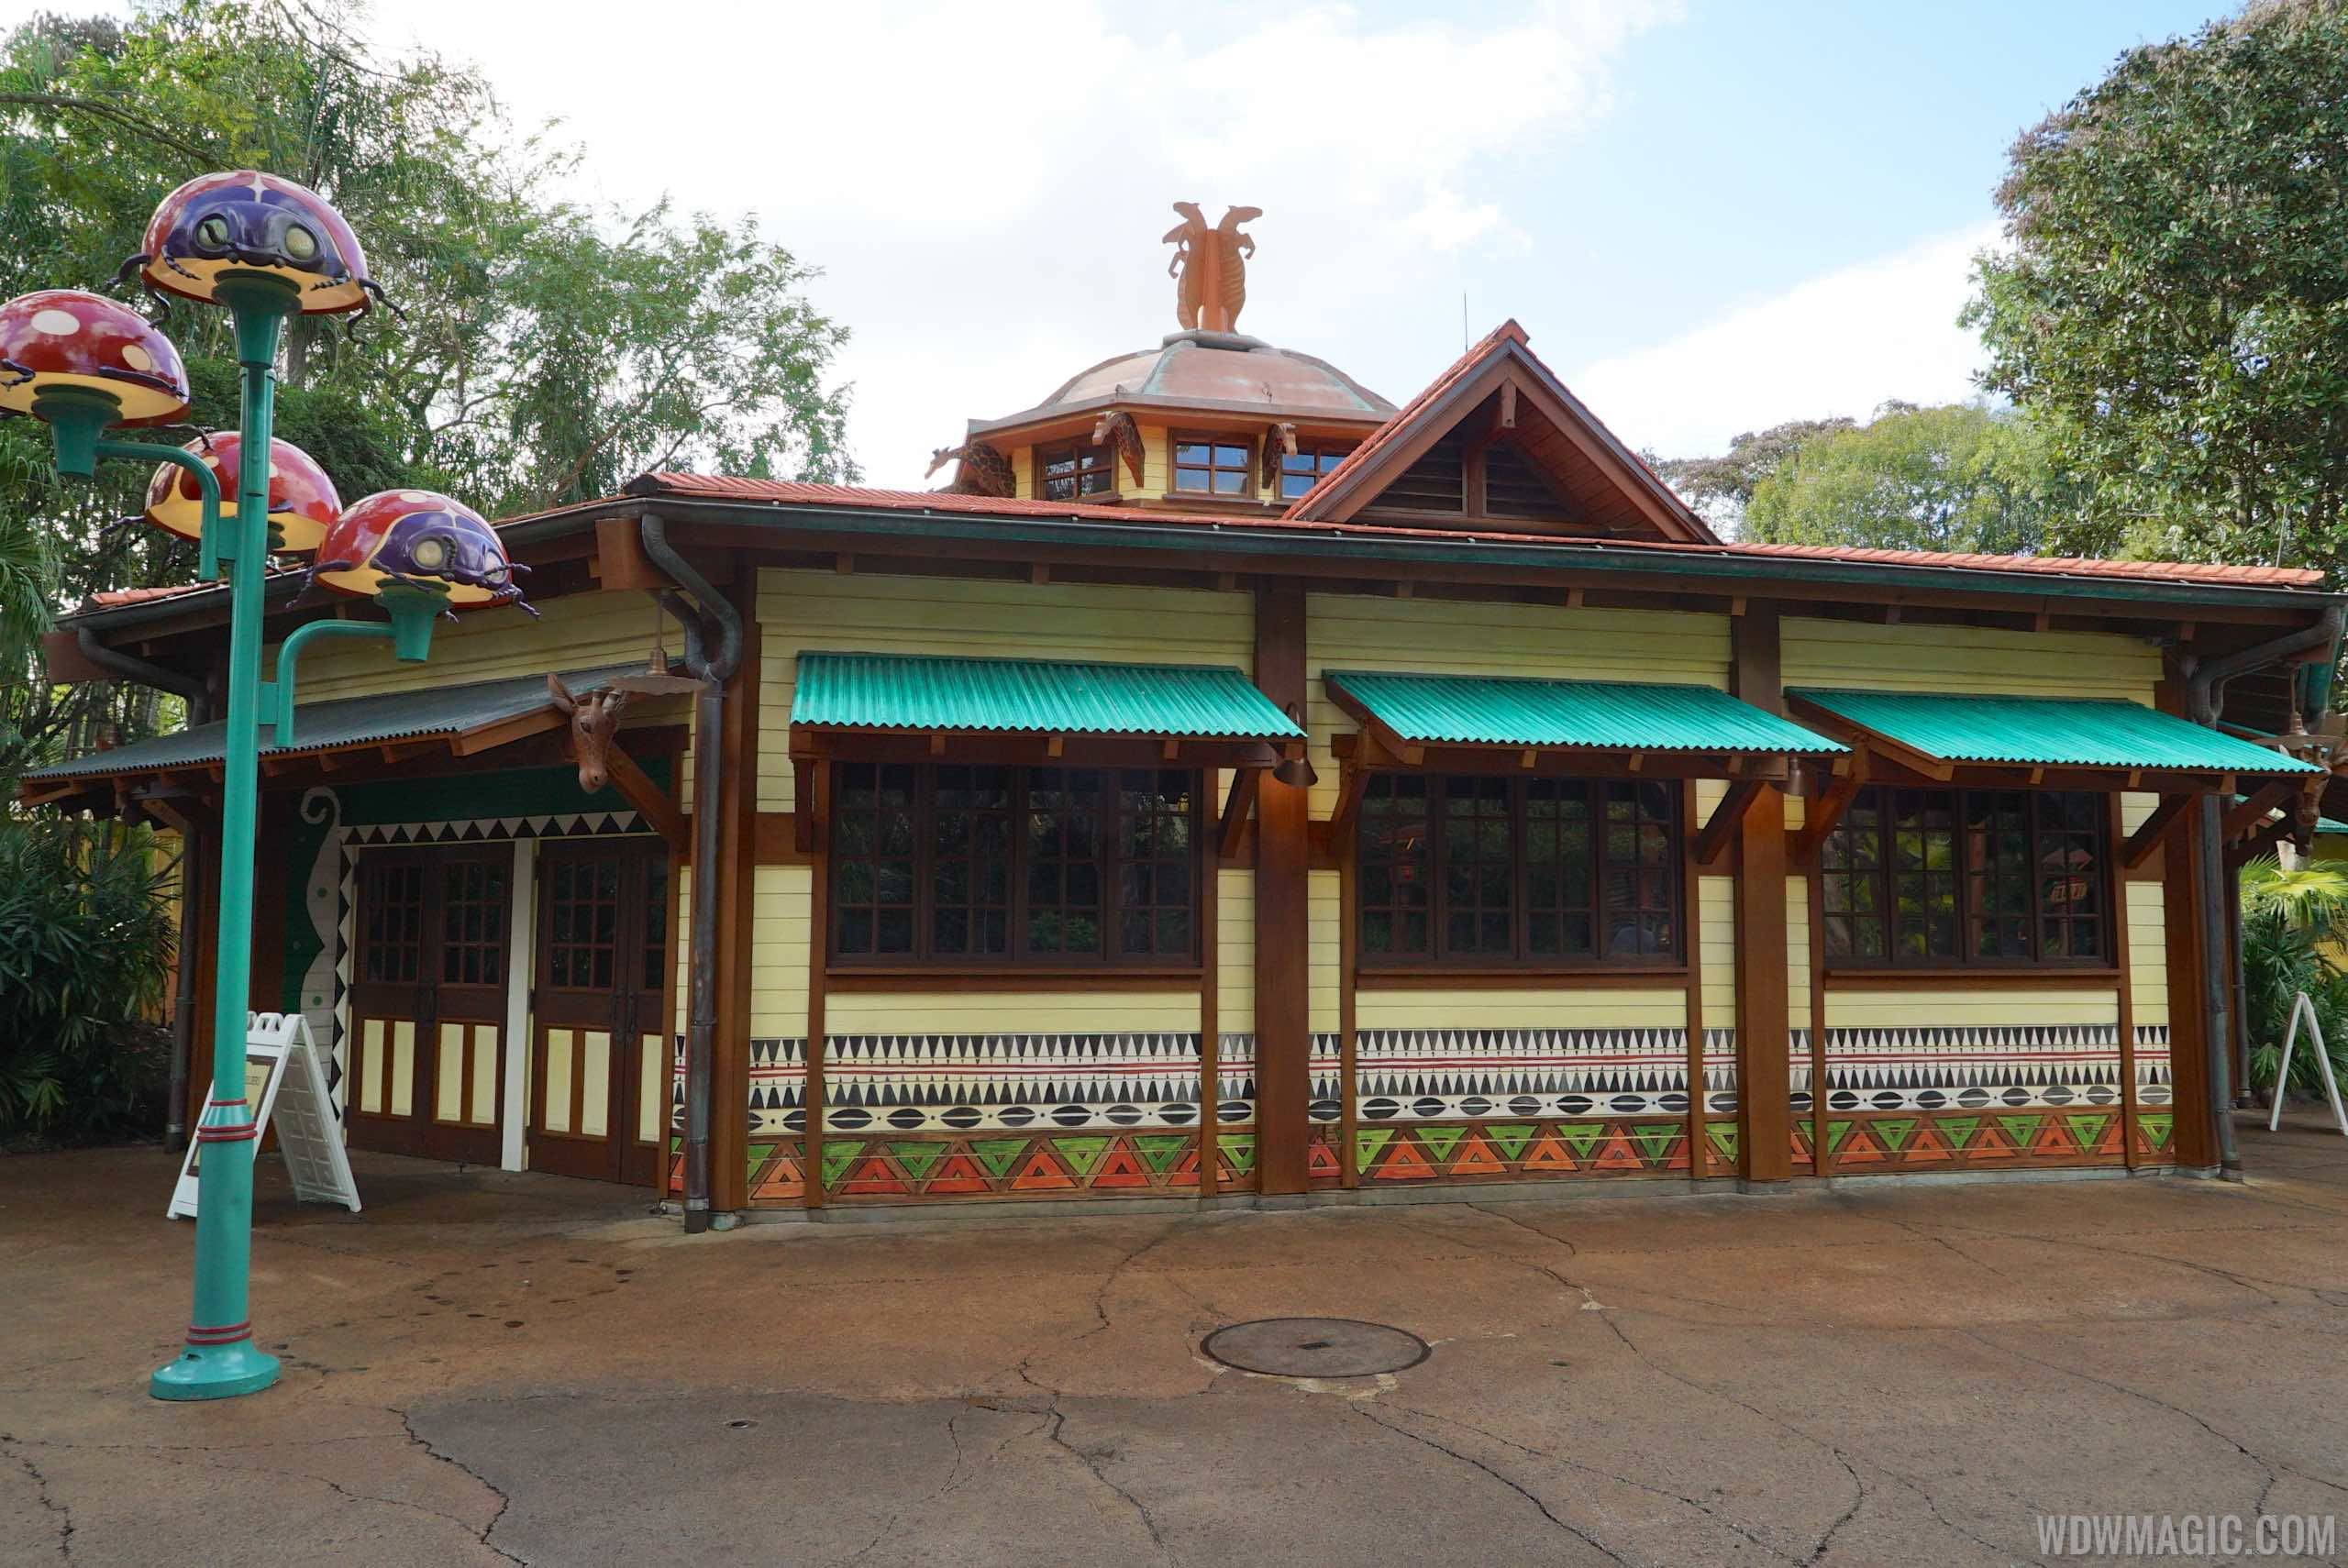 PHOTOS - Former Creature Comforts gets new color scheme ahead of the Starbucks conversion at Disney's Animal Kingdom